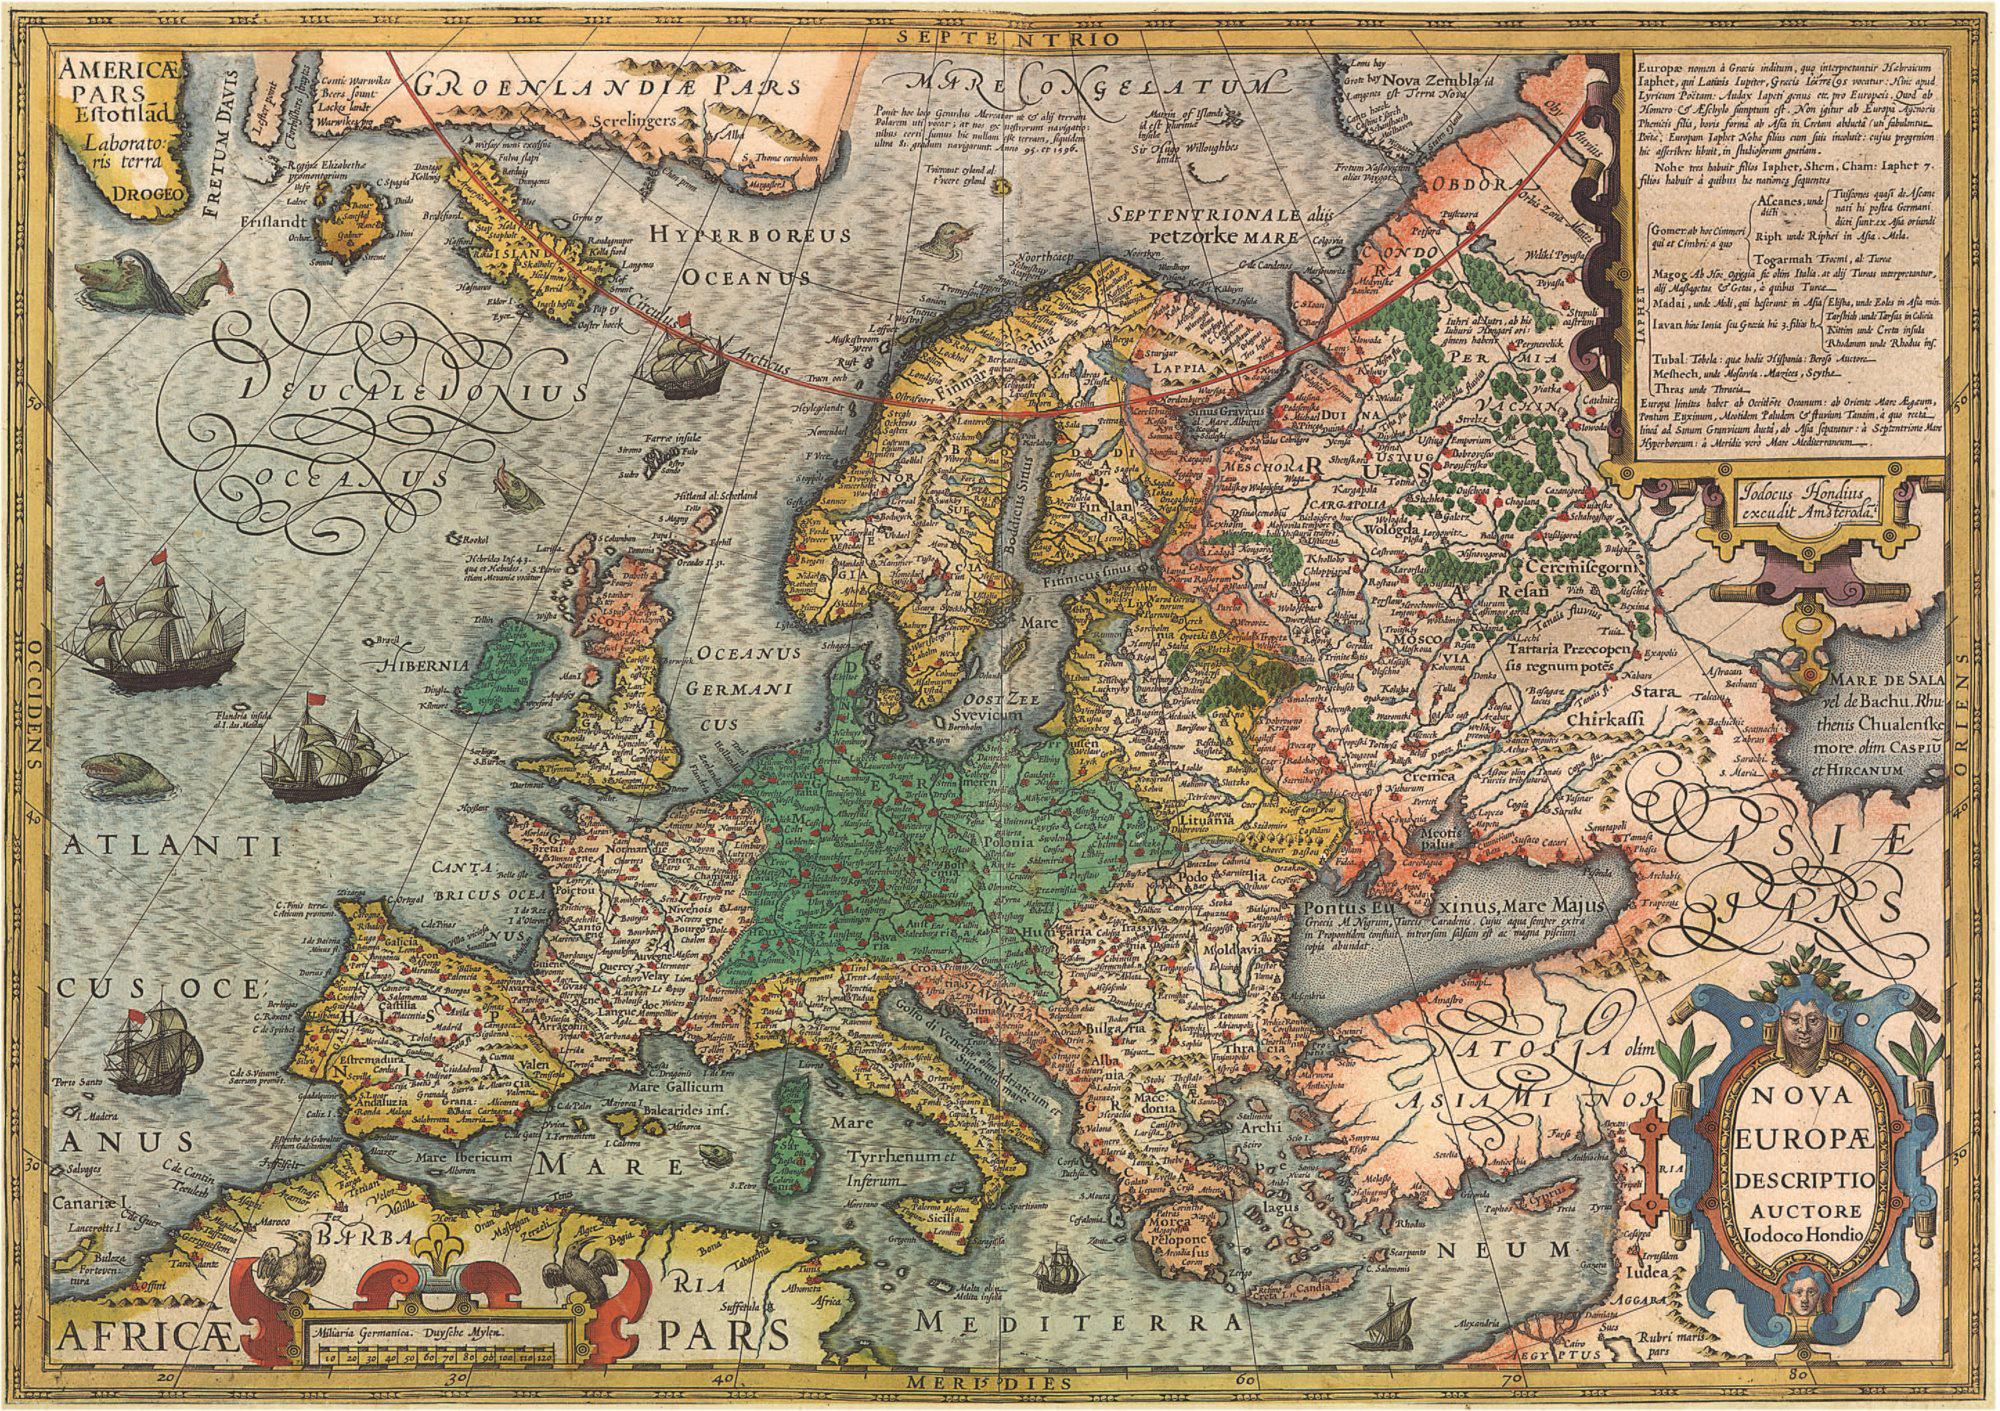 Puzzle Map of Europe 1000